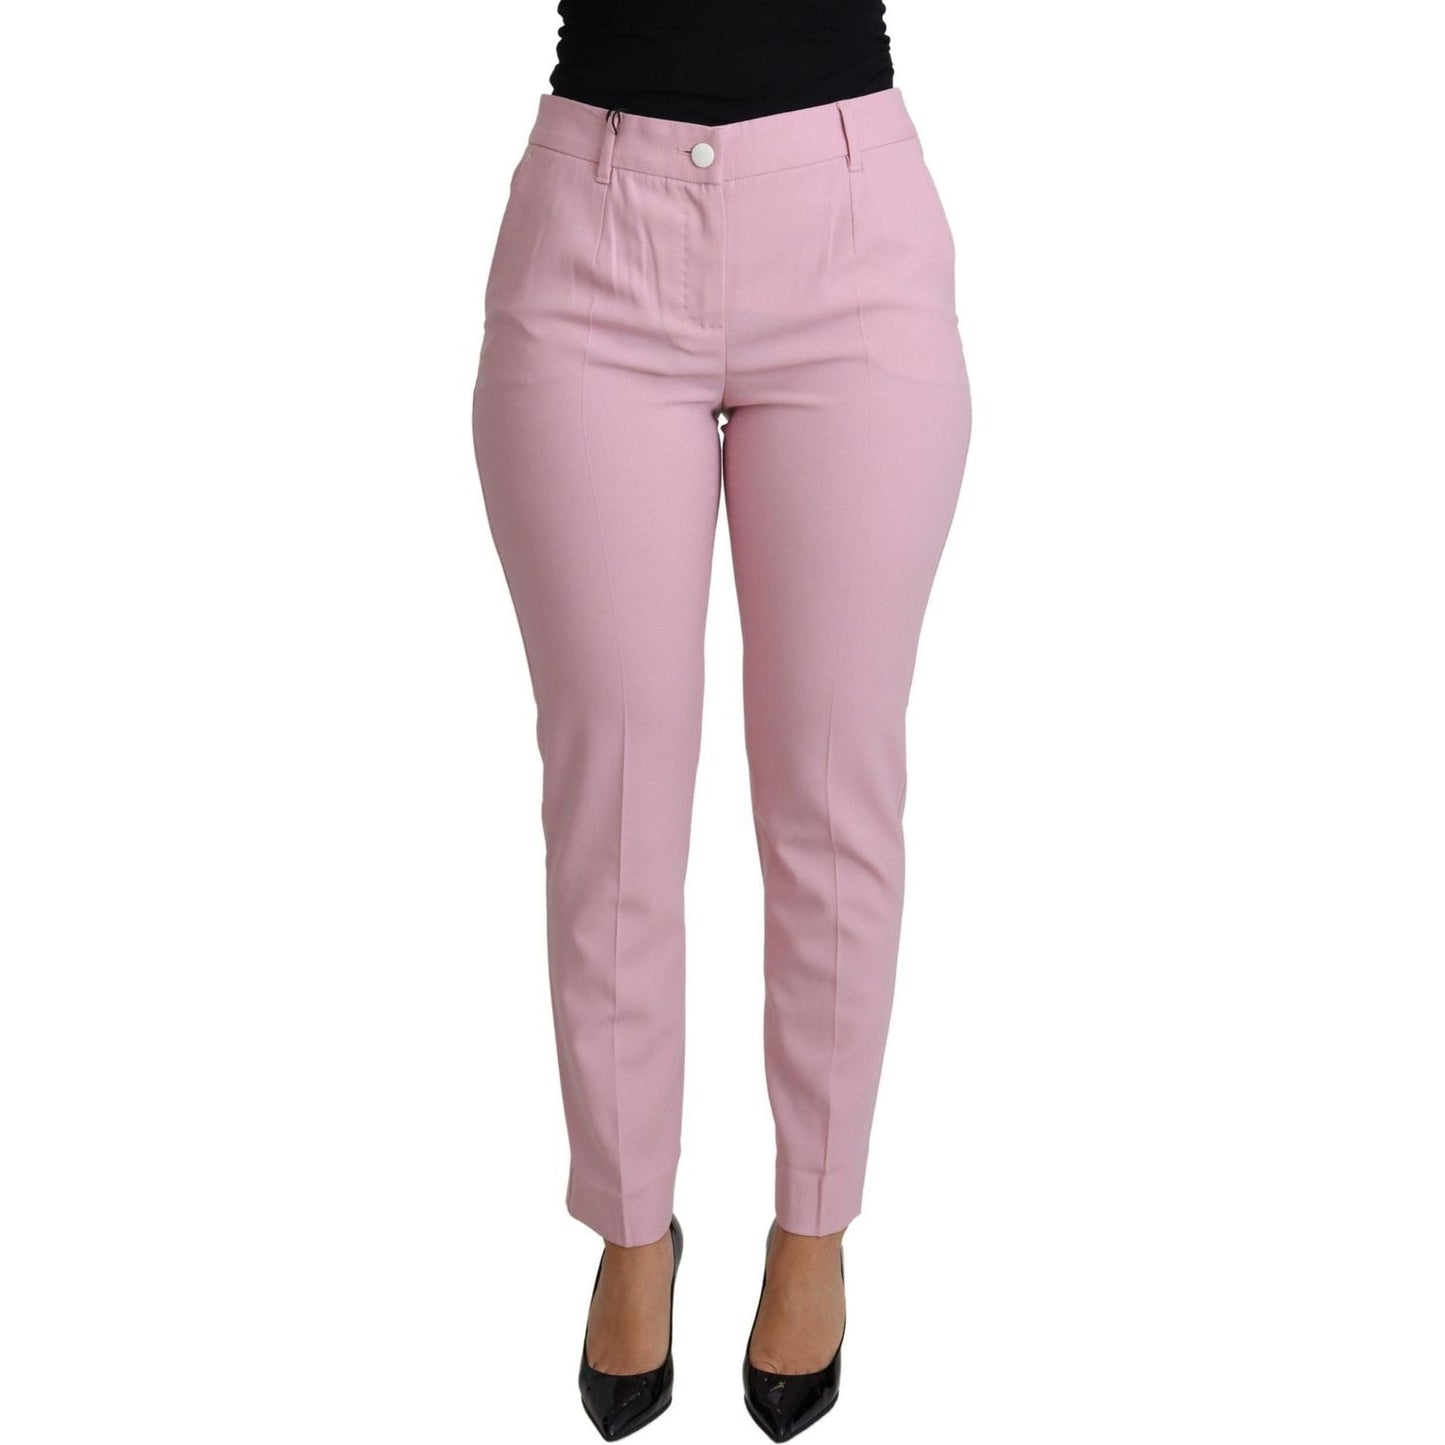 Dolce & Gabbana Elegant Pink High-Waisted Wool Trousers pink-virgin-wool-stretch-tapered-trouser-pants